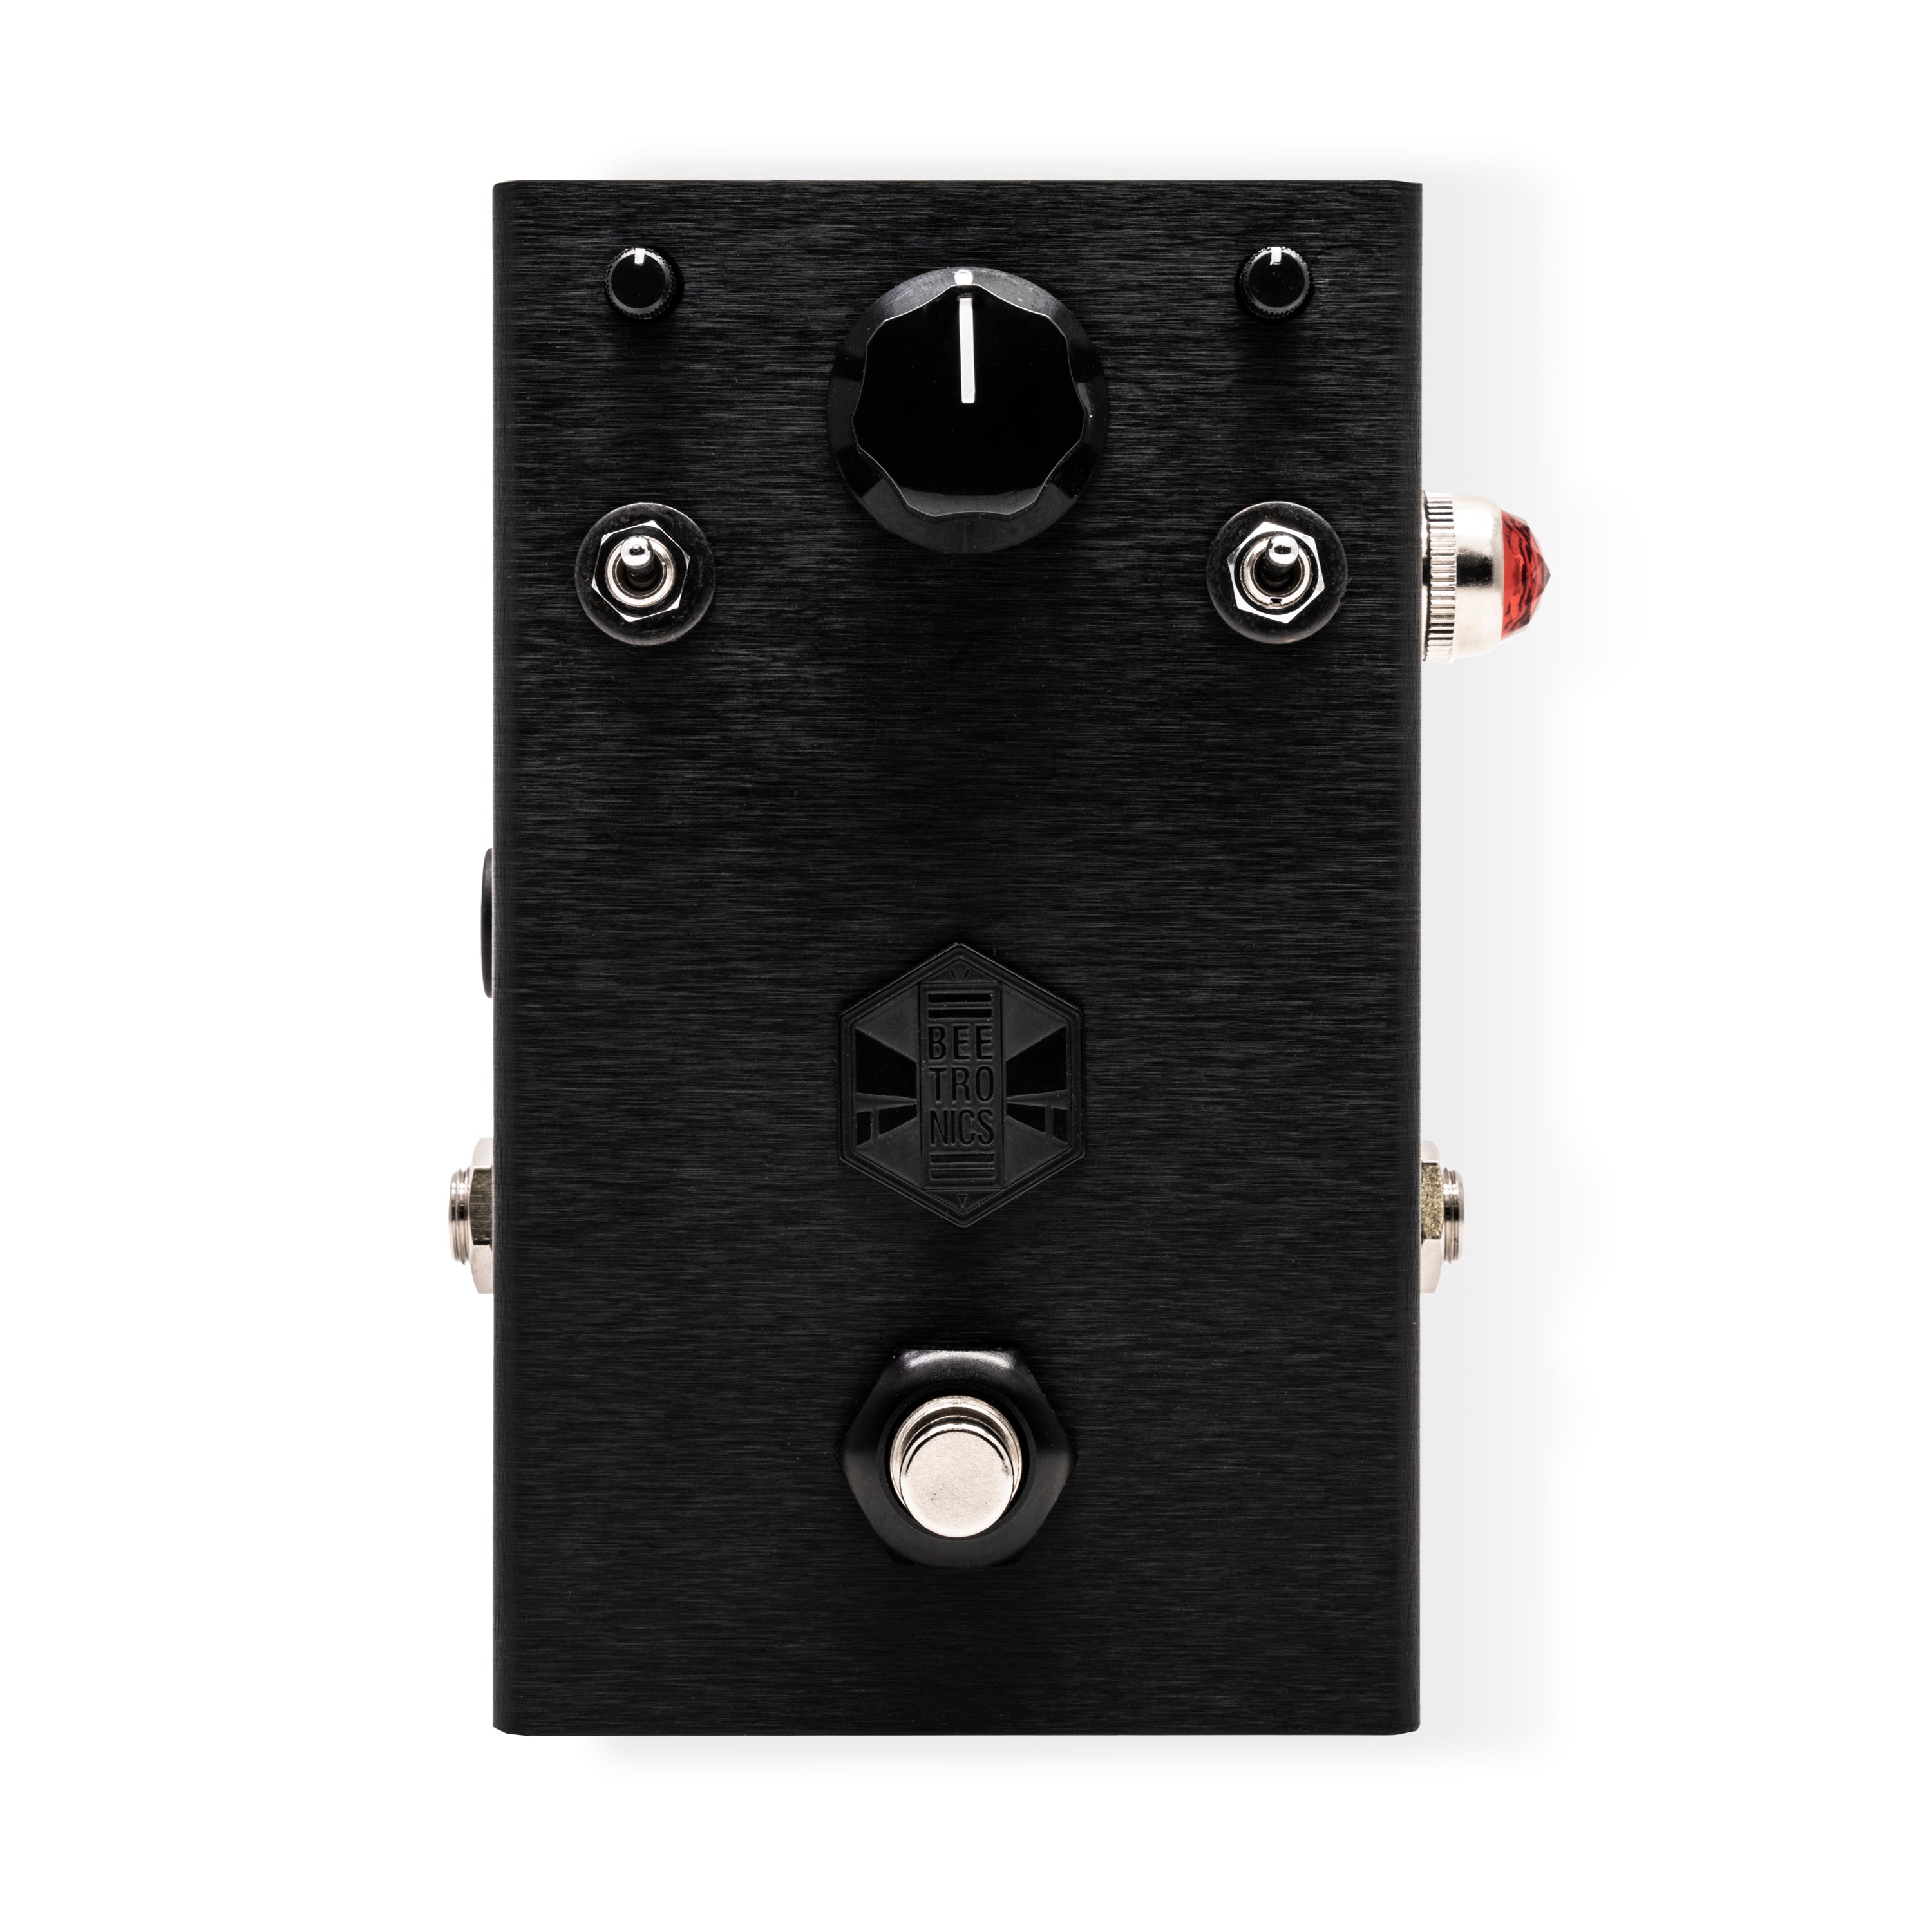 Overhive Mid-Gain Overdrive &lt;p&gt; The Blackbee Edition